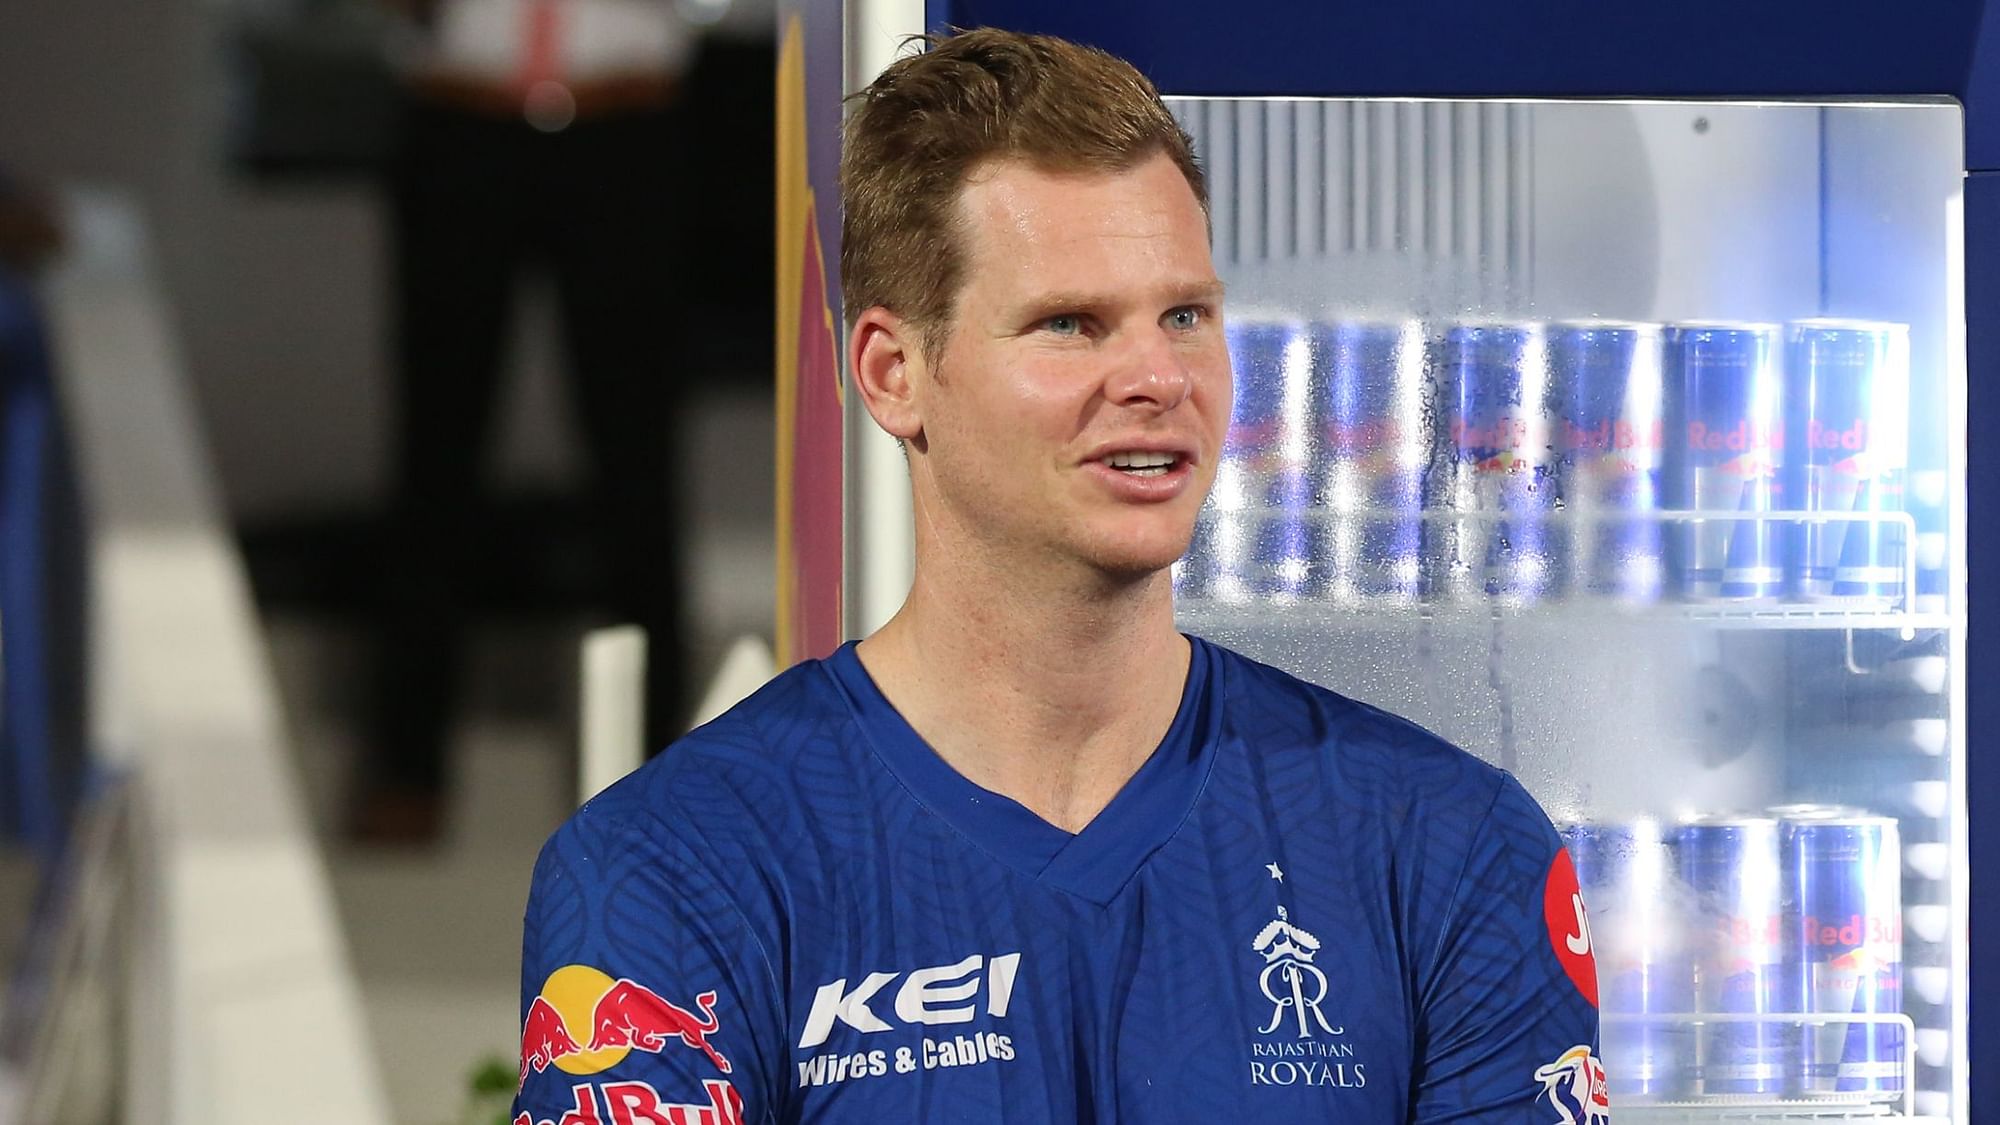 Here’s what Steve Smith said about the possibility of Ben Stokes playing the next match for Rajasthan Royals.